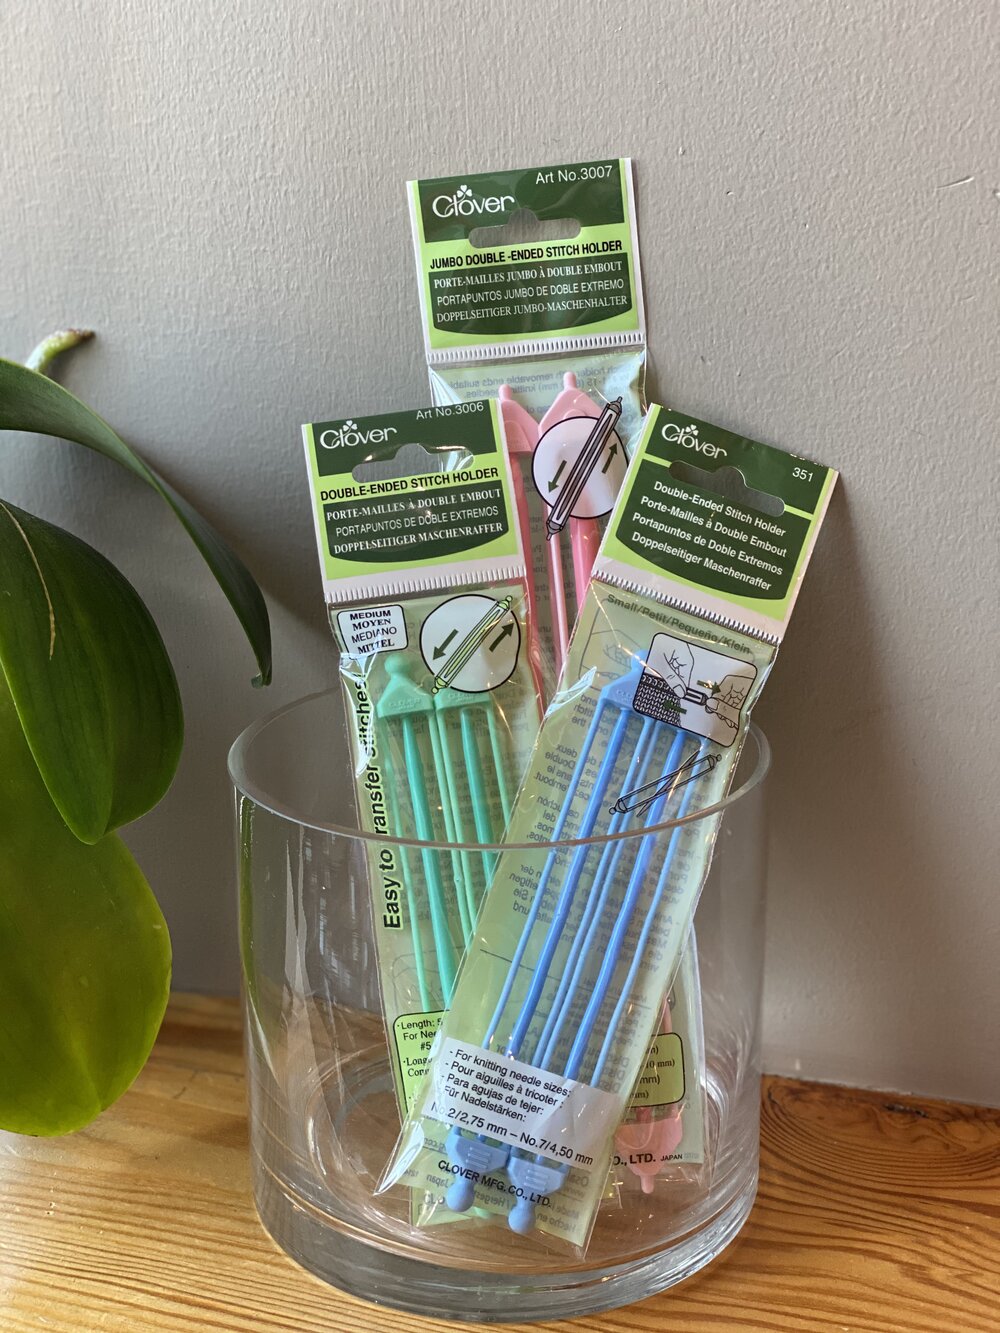 Double Ended Stitch Holder - Clover — Starlight Knitting Society